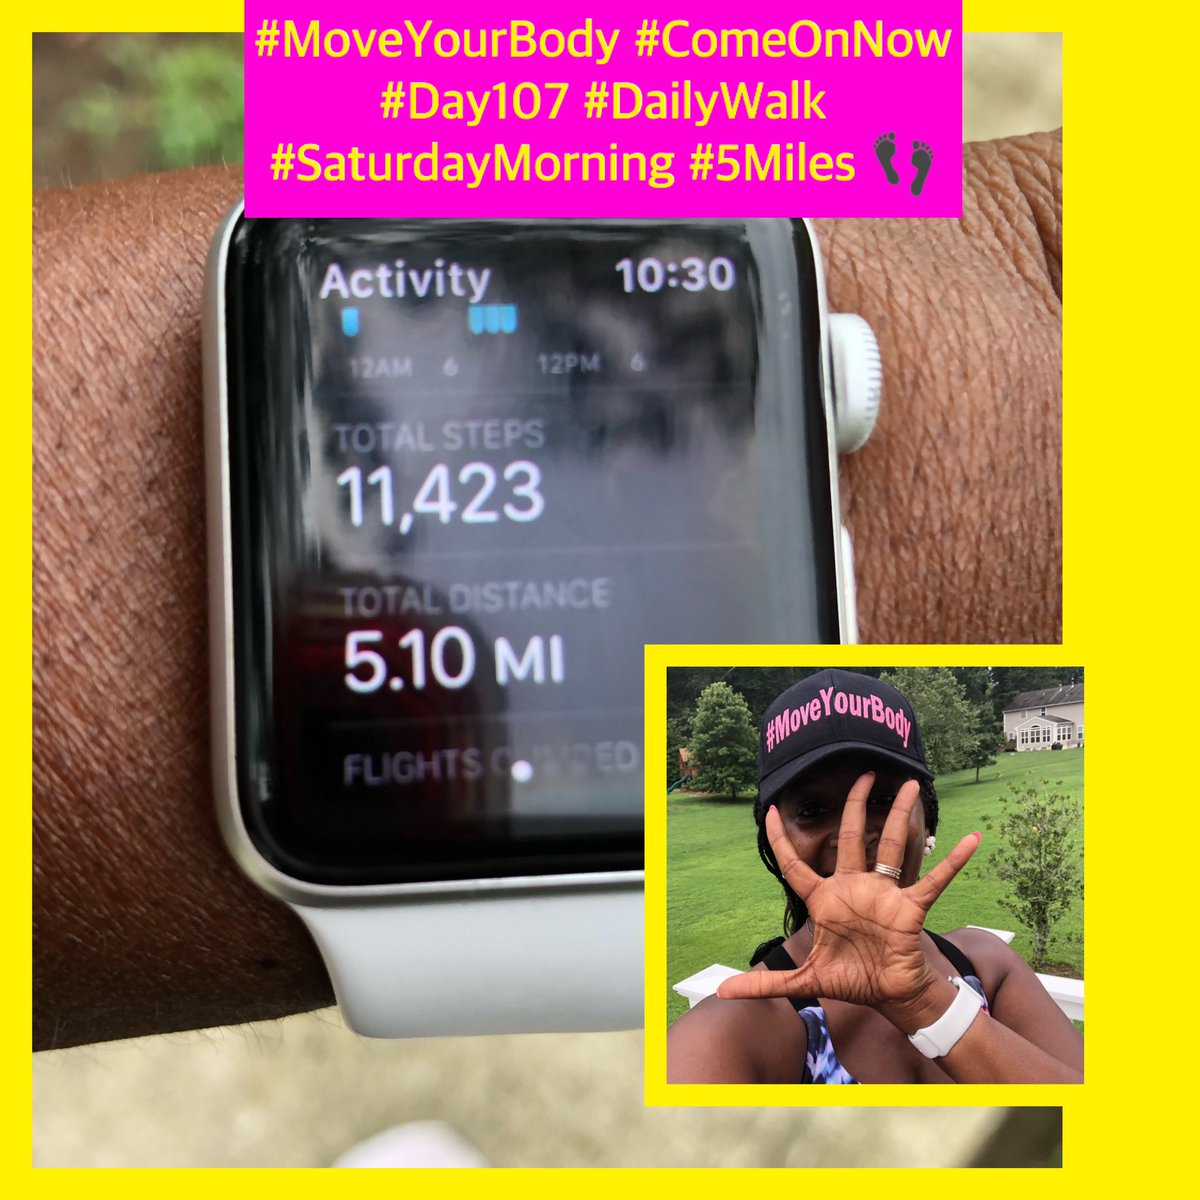 Stay encouraged! 
You can do this, start w/15Min
 #MoveYourBody #ComeOnNow 

#Day107 #DailyWalk #noexcuses MY Mission: 
🗣MOTIVATE YOU #GetUp #MoveYourBodyMovement #MoveYourBodyWellness #MoveYourBodyMotivator #LifestyleWellness #HealthandFitness #Energy #Nutrition #Gratitude 🙏🏾